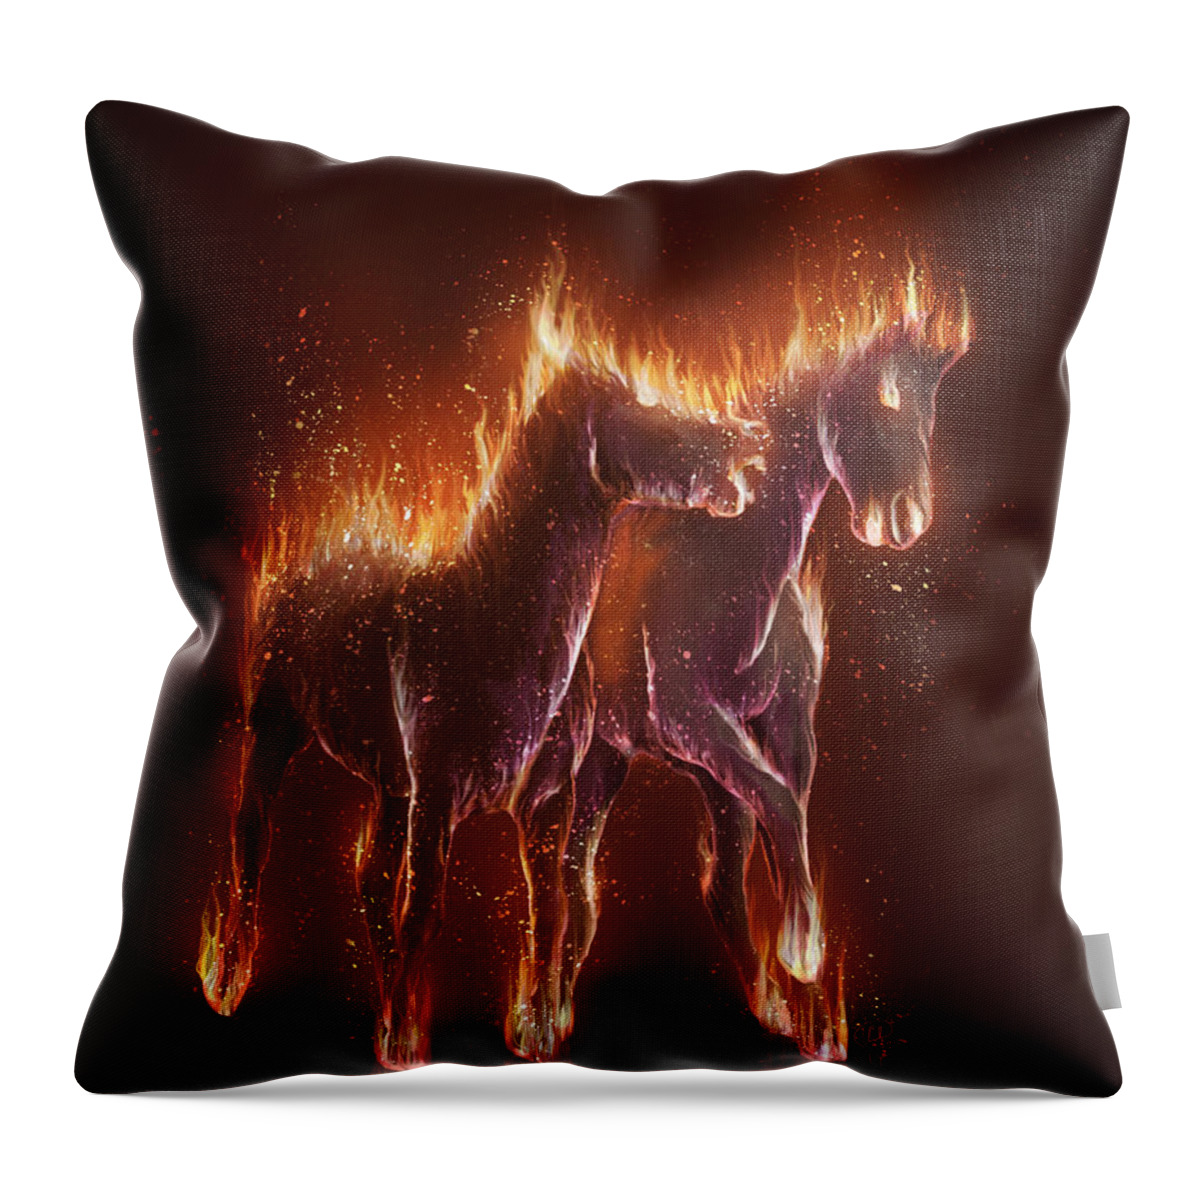 Hell Throw Pillow featuring the digital art From Hell by Kate Black